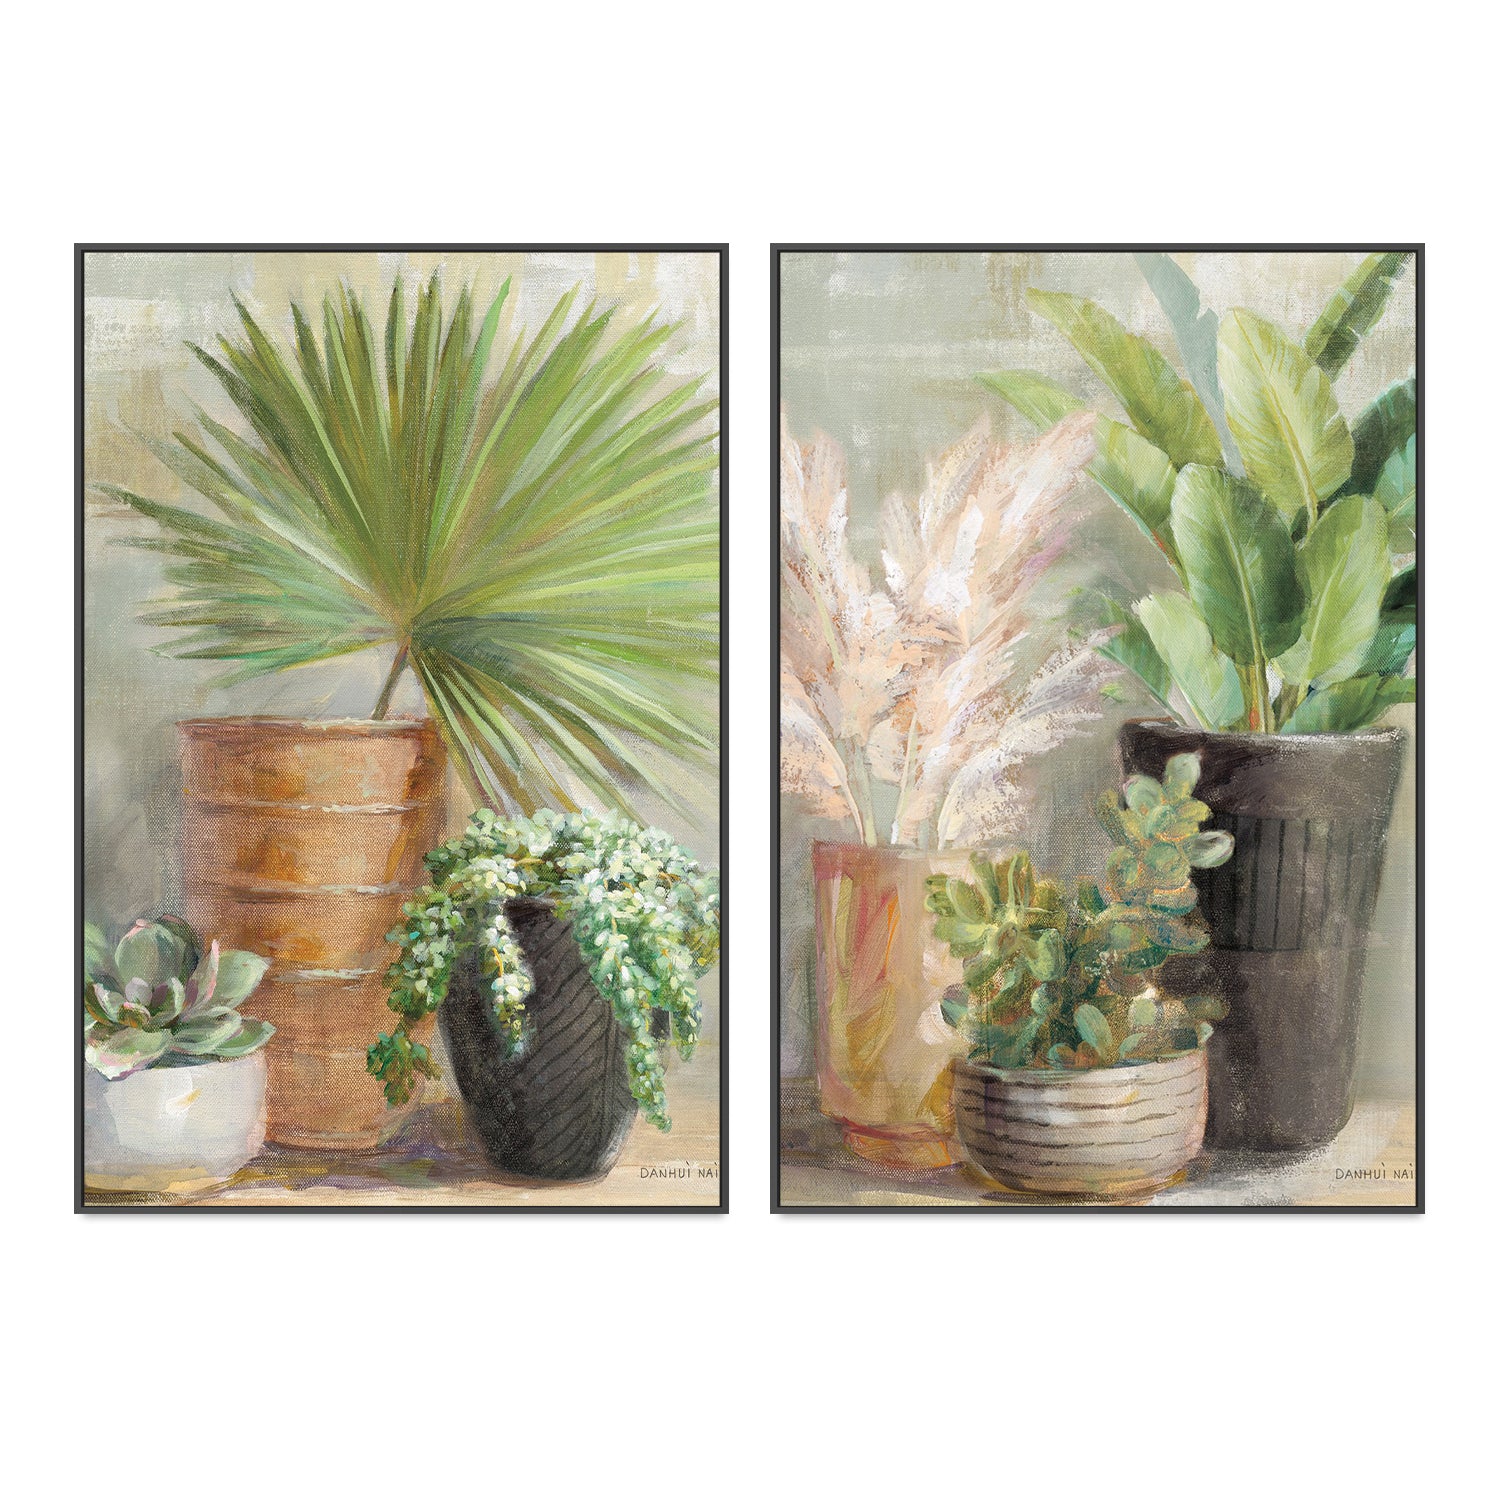 wall-art-print-canvas-poster-framed-Indoor Garden, Set of 2-by-Danhui Nai-Gioia Wall Art